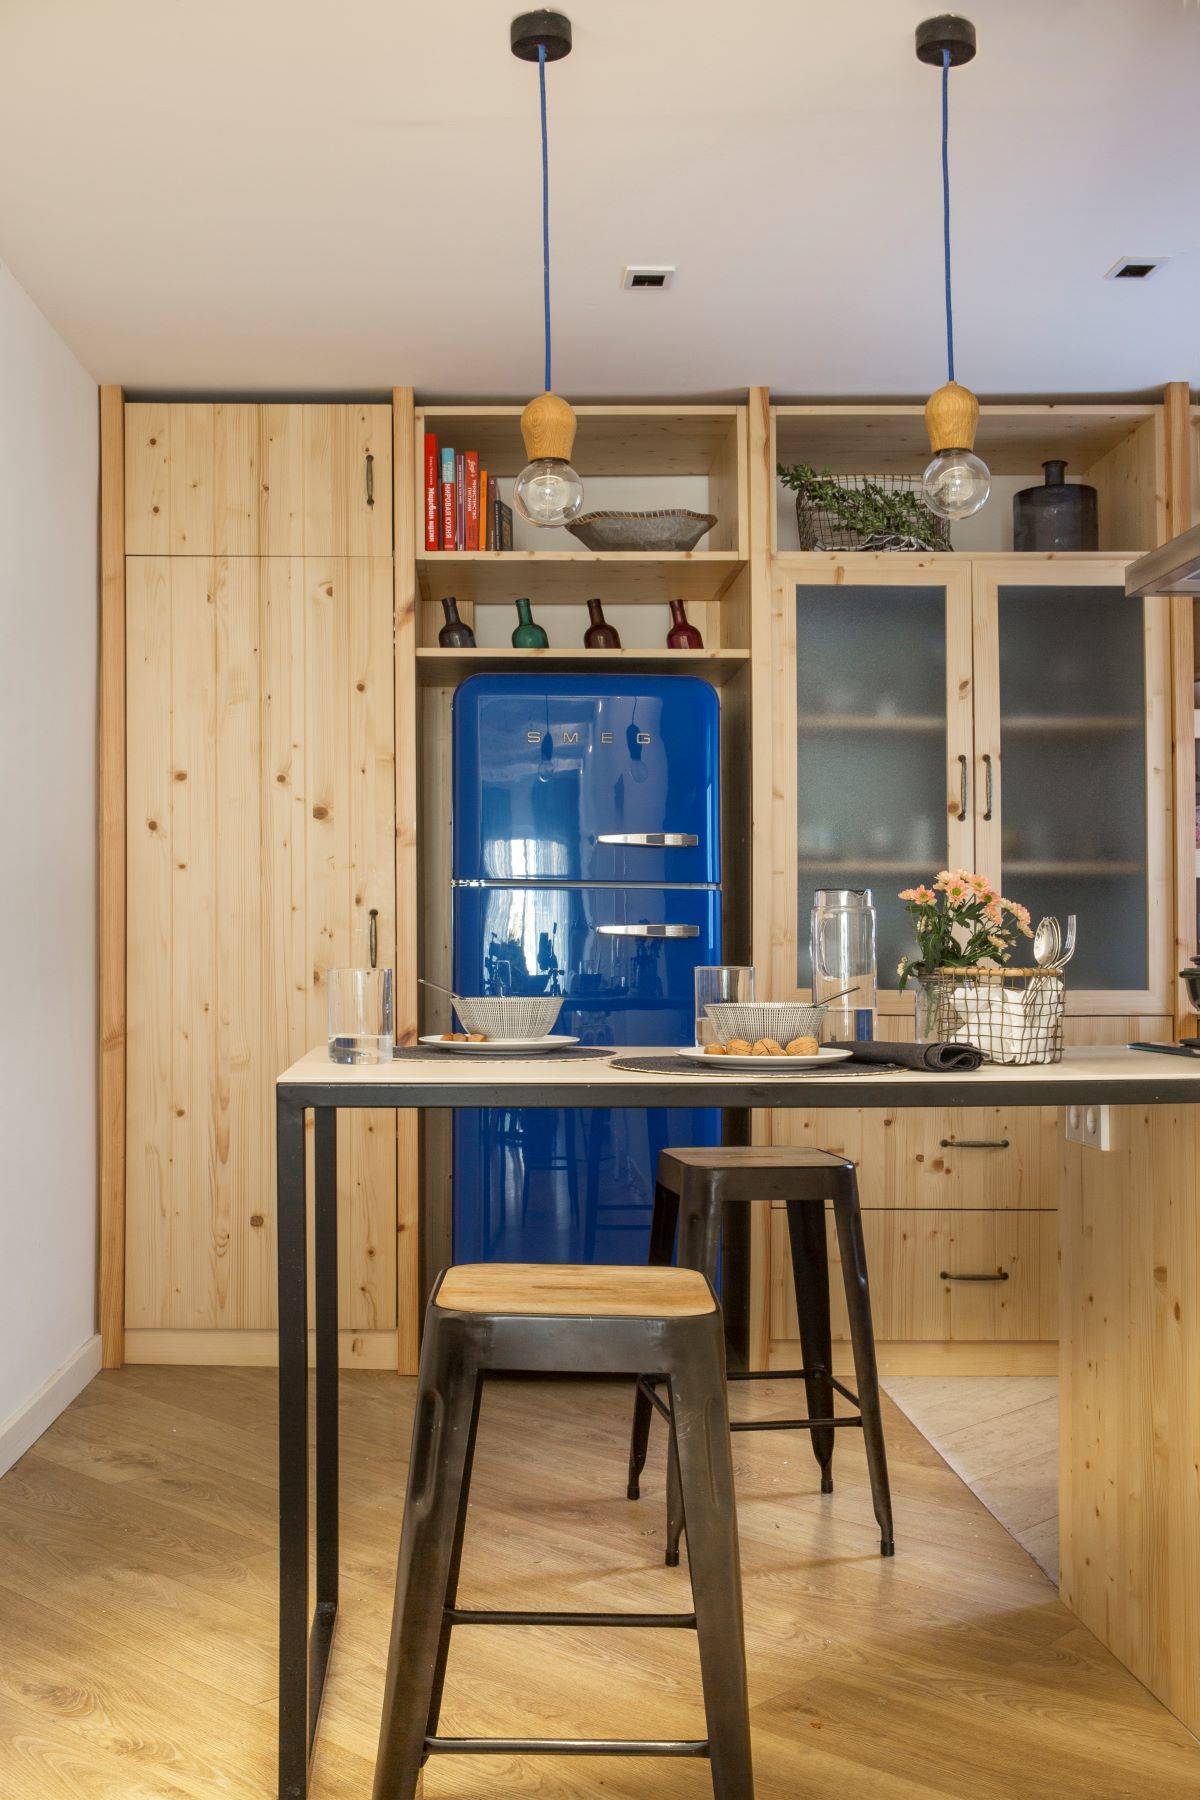 Small wooden kitchen with blue fridge. 